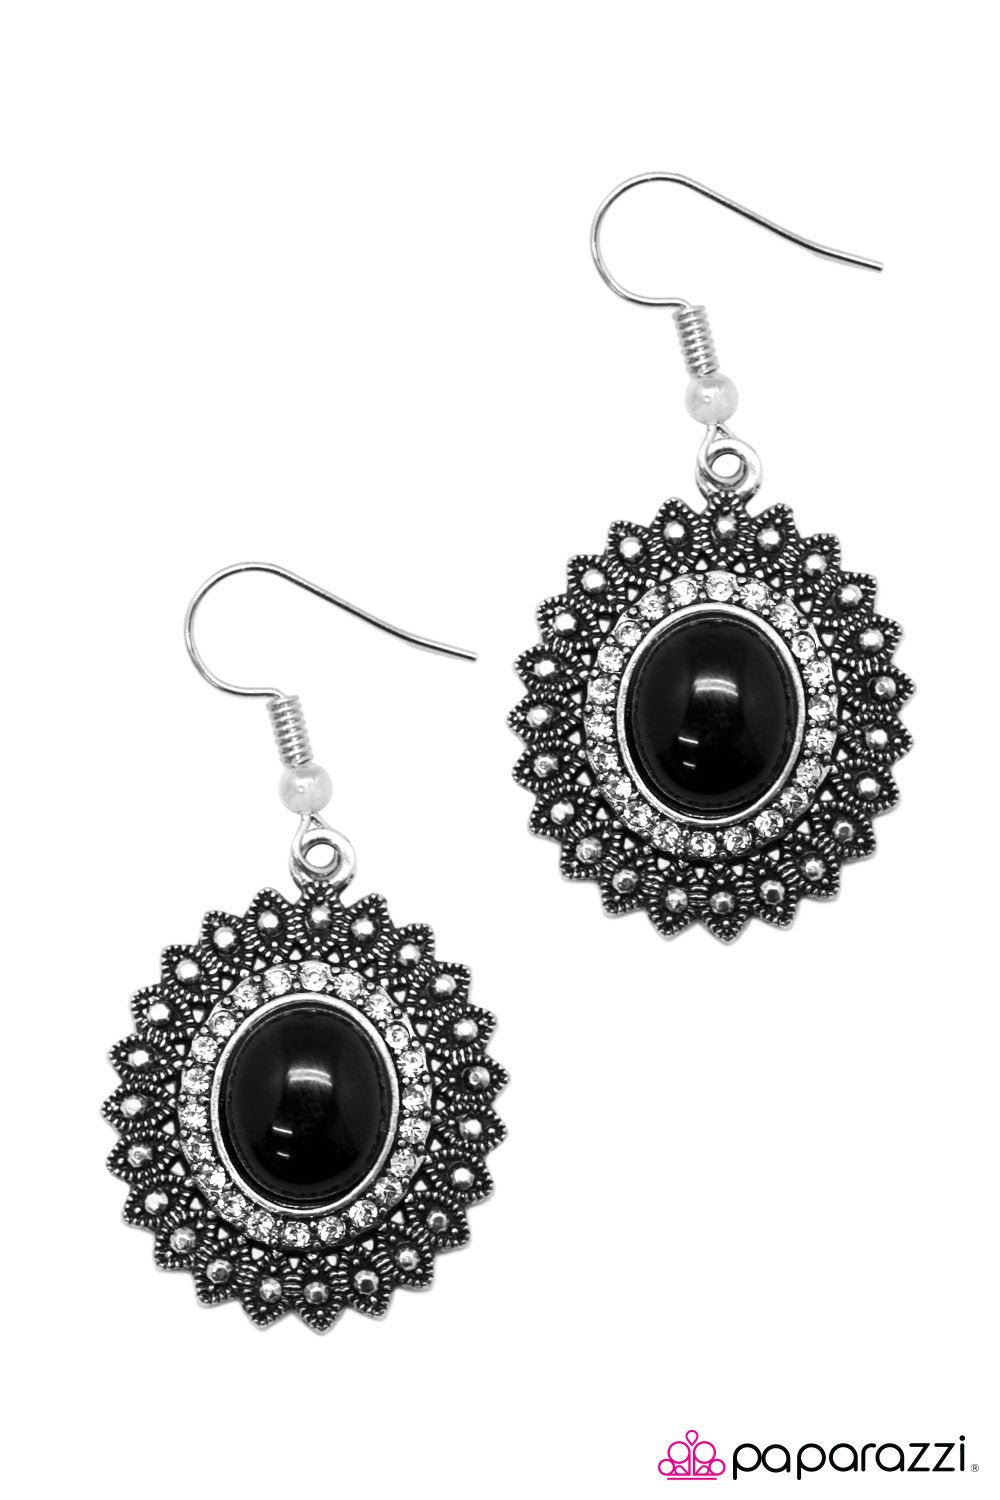 The Academy Awards Black Earrings - Paparazzi Accessories-CarasShop.com - $5 Jewelry by Cara Jewels